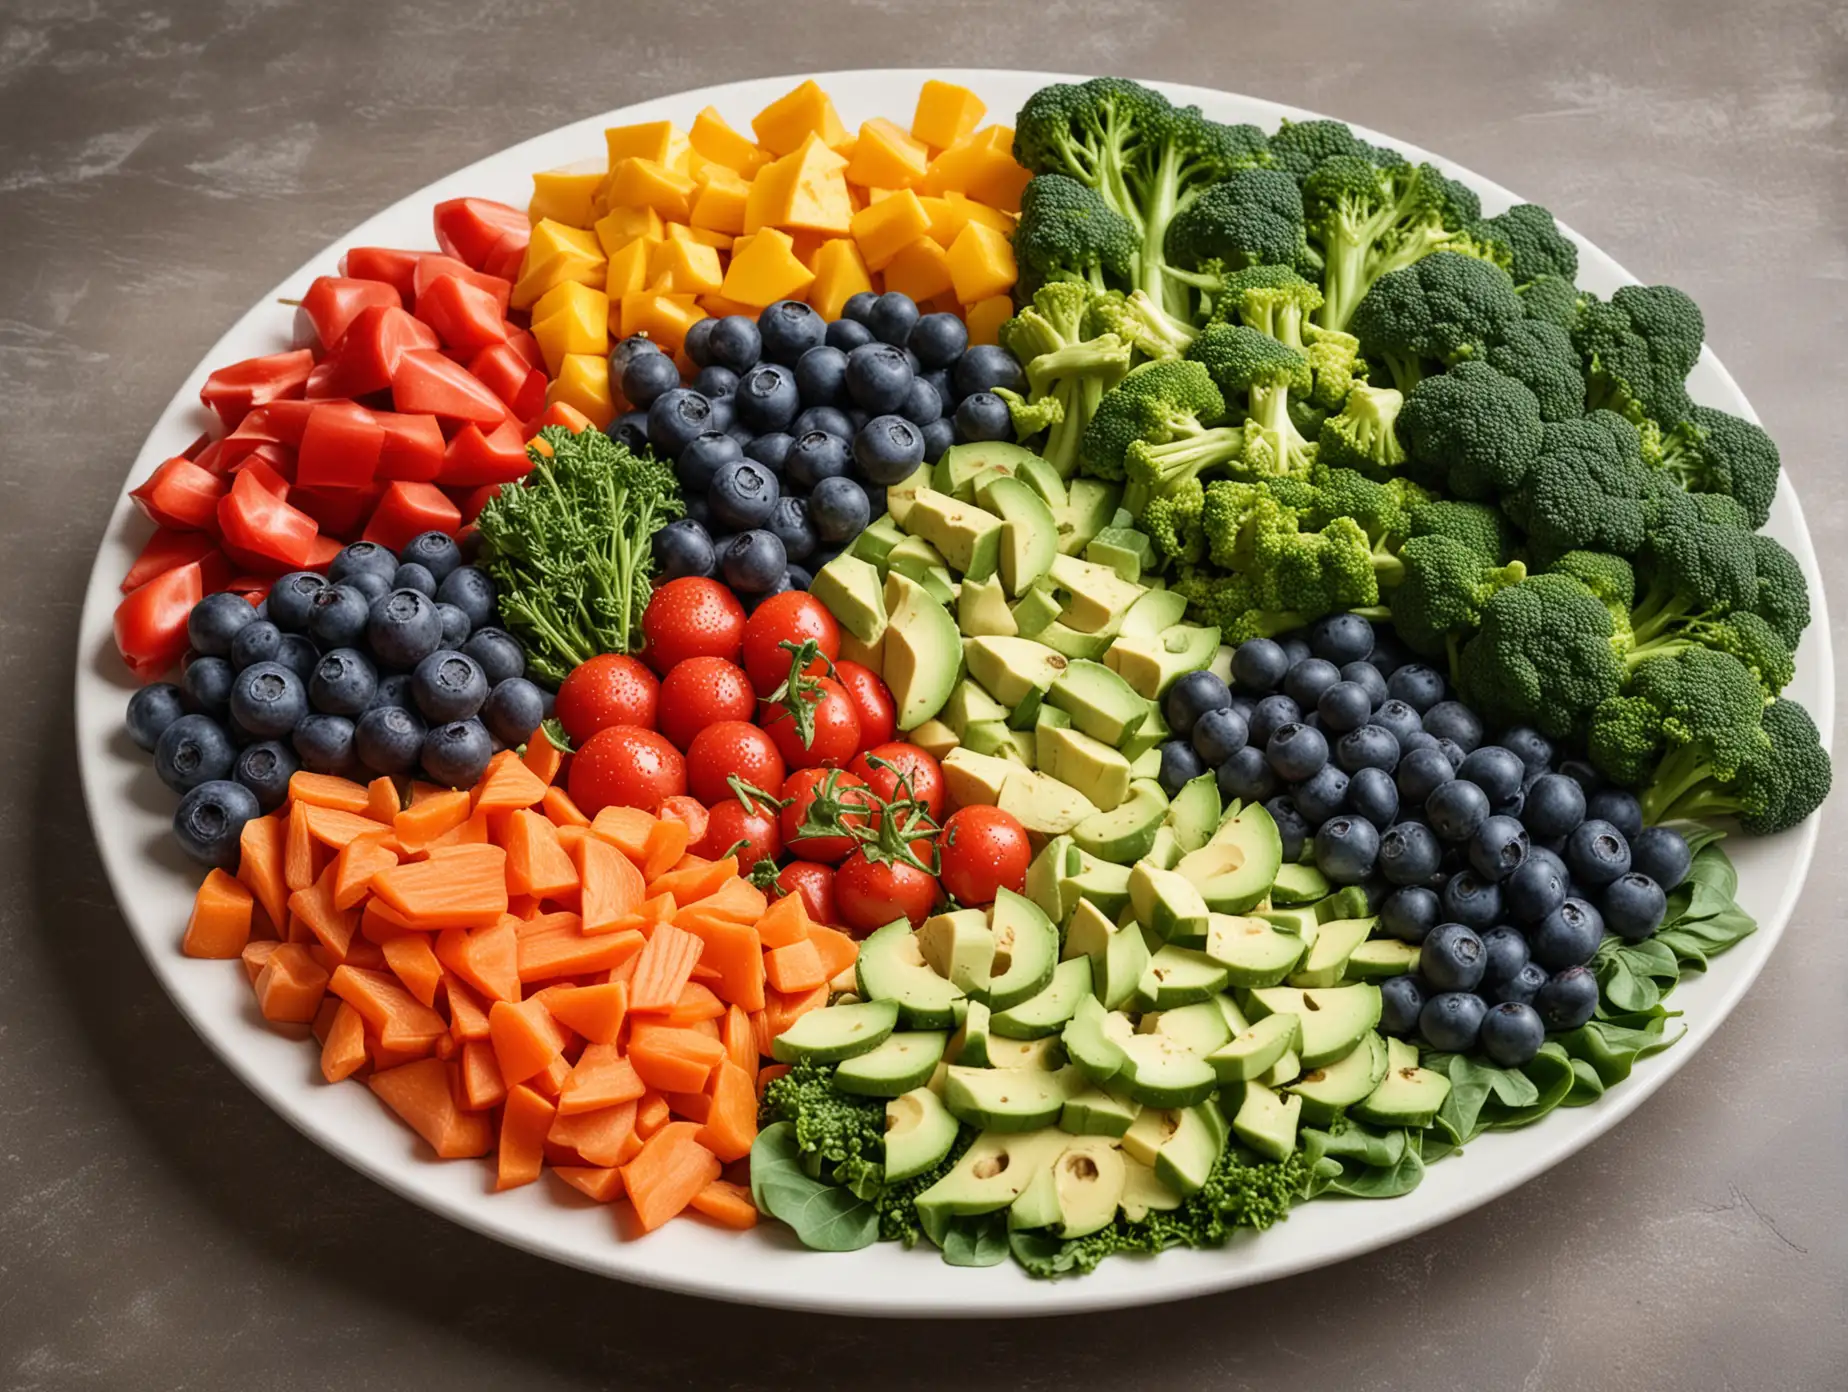 Show an image of a plate filled with colorful fruits and vegetables, such as blueberries, spinach, broccoli, carrots, and red bell peppers. The plate should be surrounded by images of other natural sources of glutathione, like avocados, asparagus, walnuts, and turmeric. The background should be a vibrant green color to represent a healthy lifestyle.